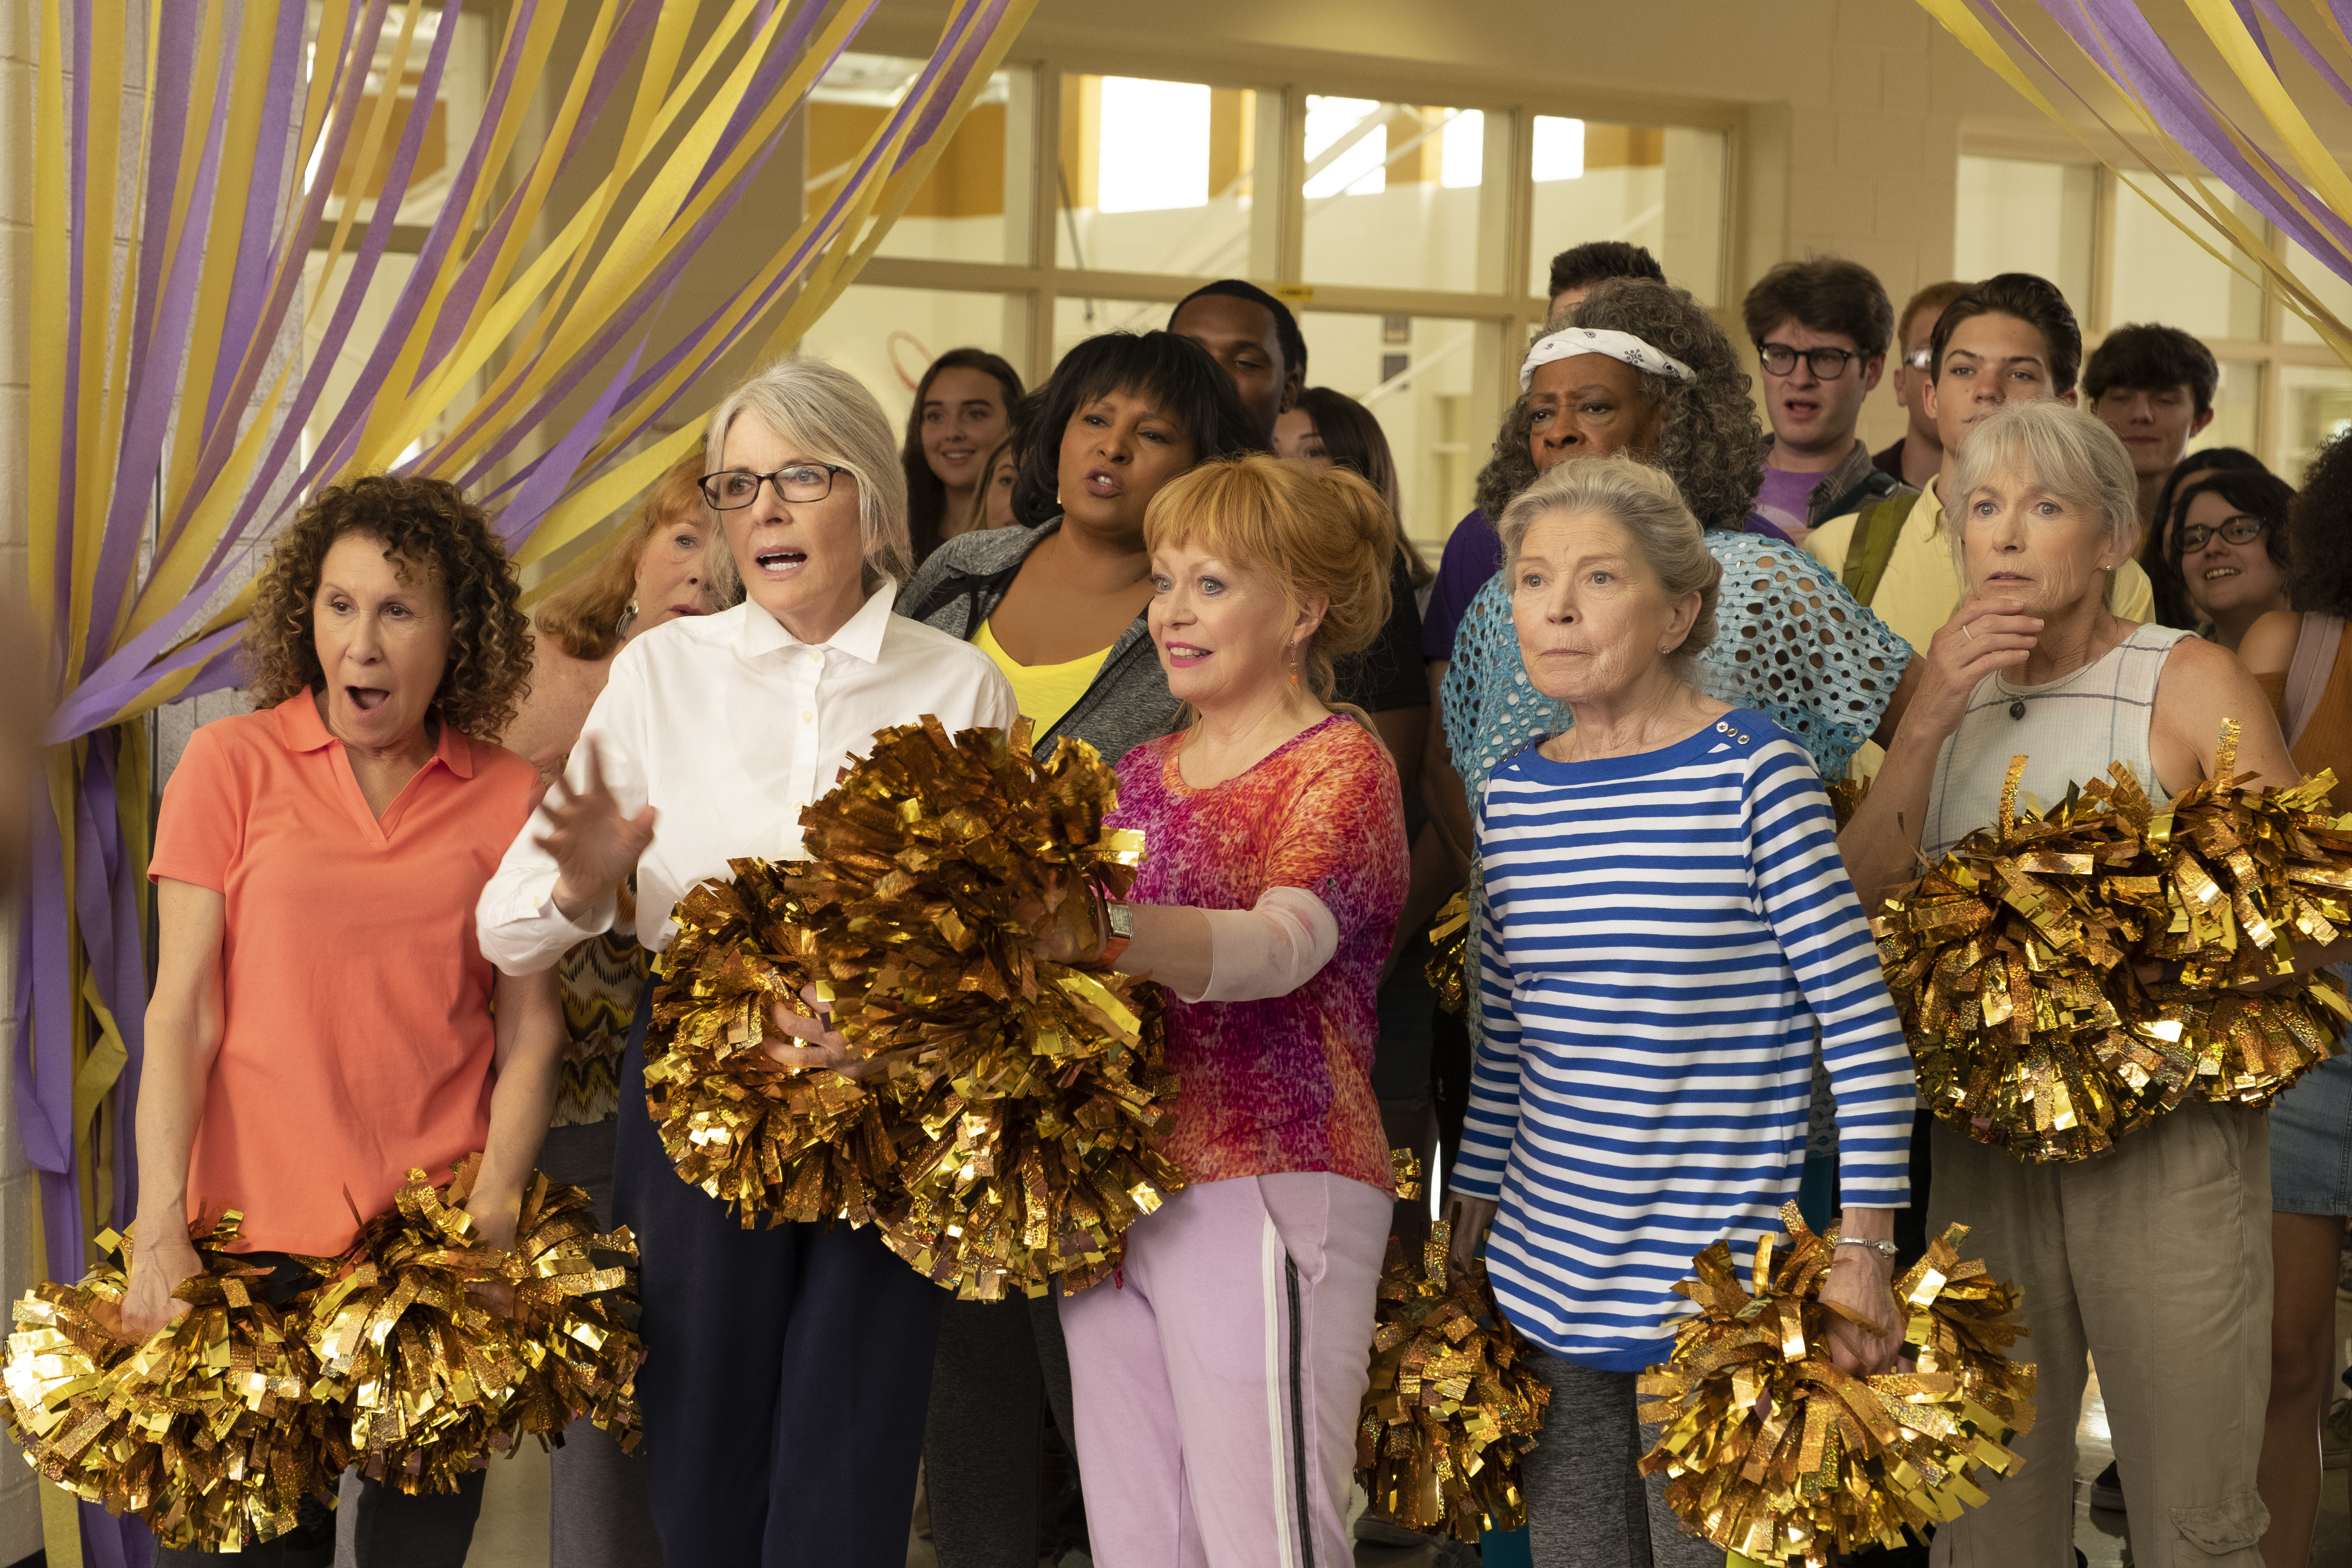 Rhea Perlman, Diane Keaton, Jacki Weaver, Phyllis Somerville, Patricia French, Pam Grier, Carol Sutton and Ginny Maccoll in Poms.